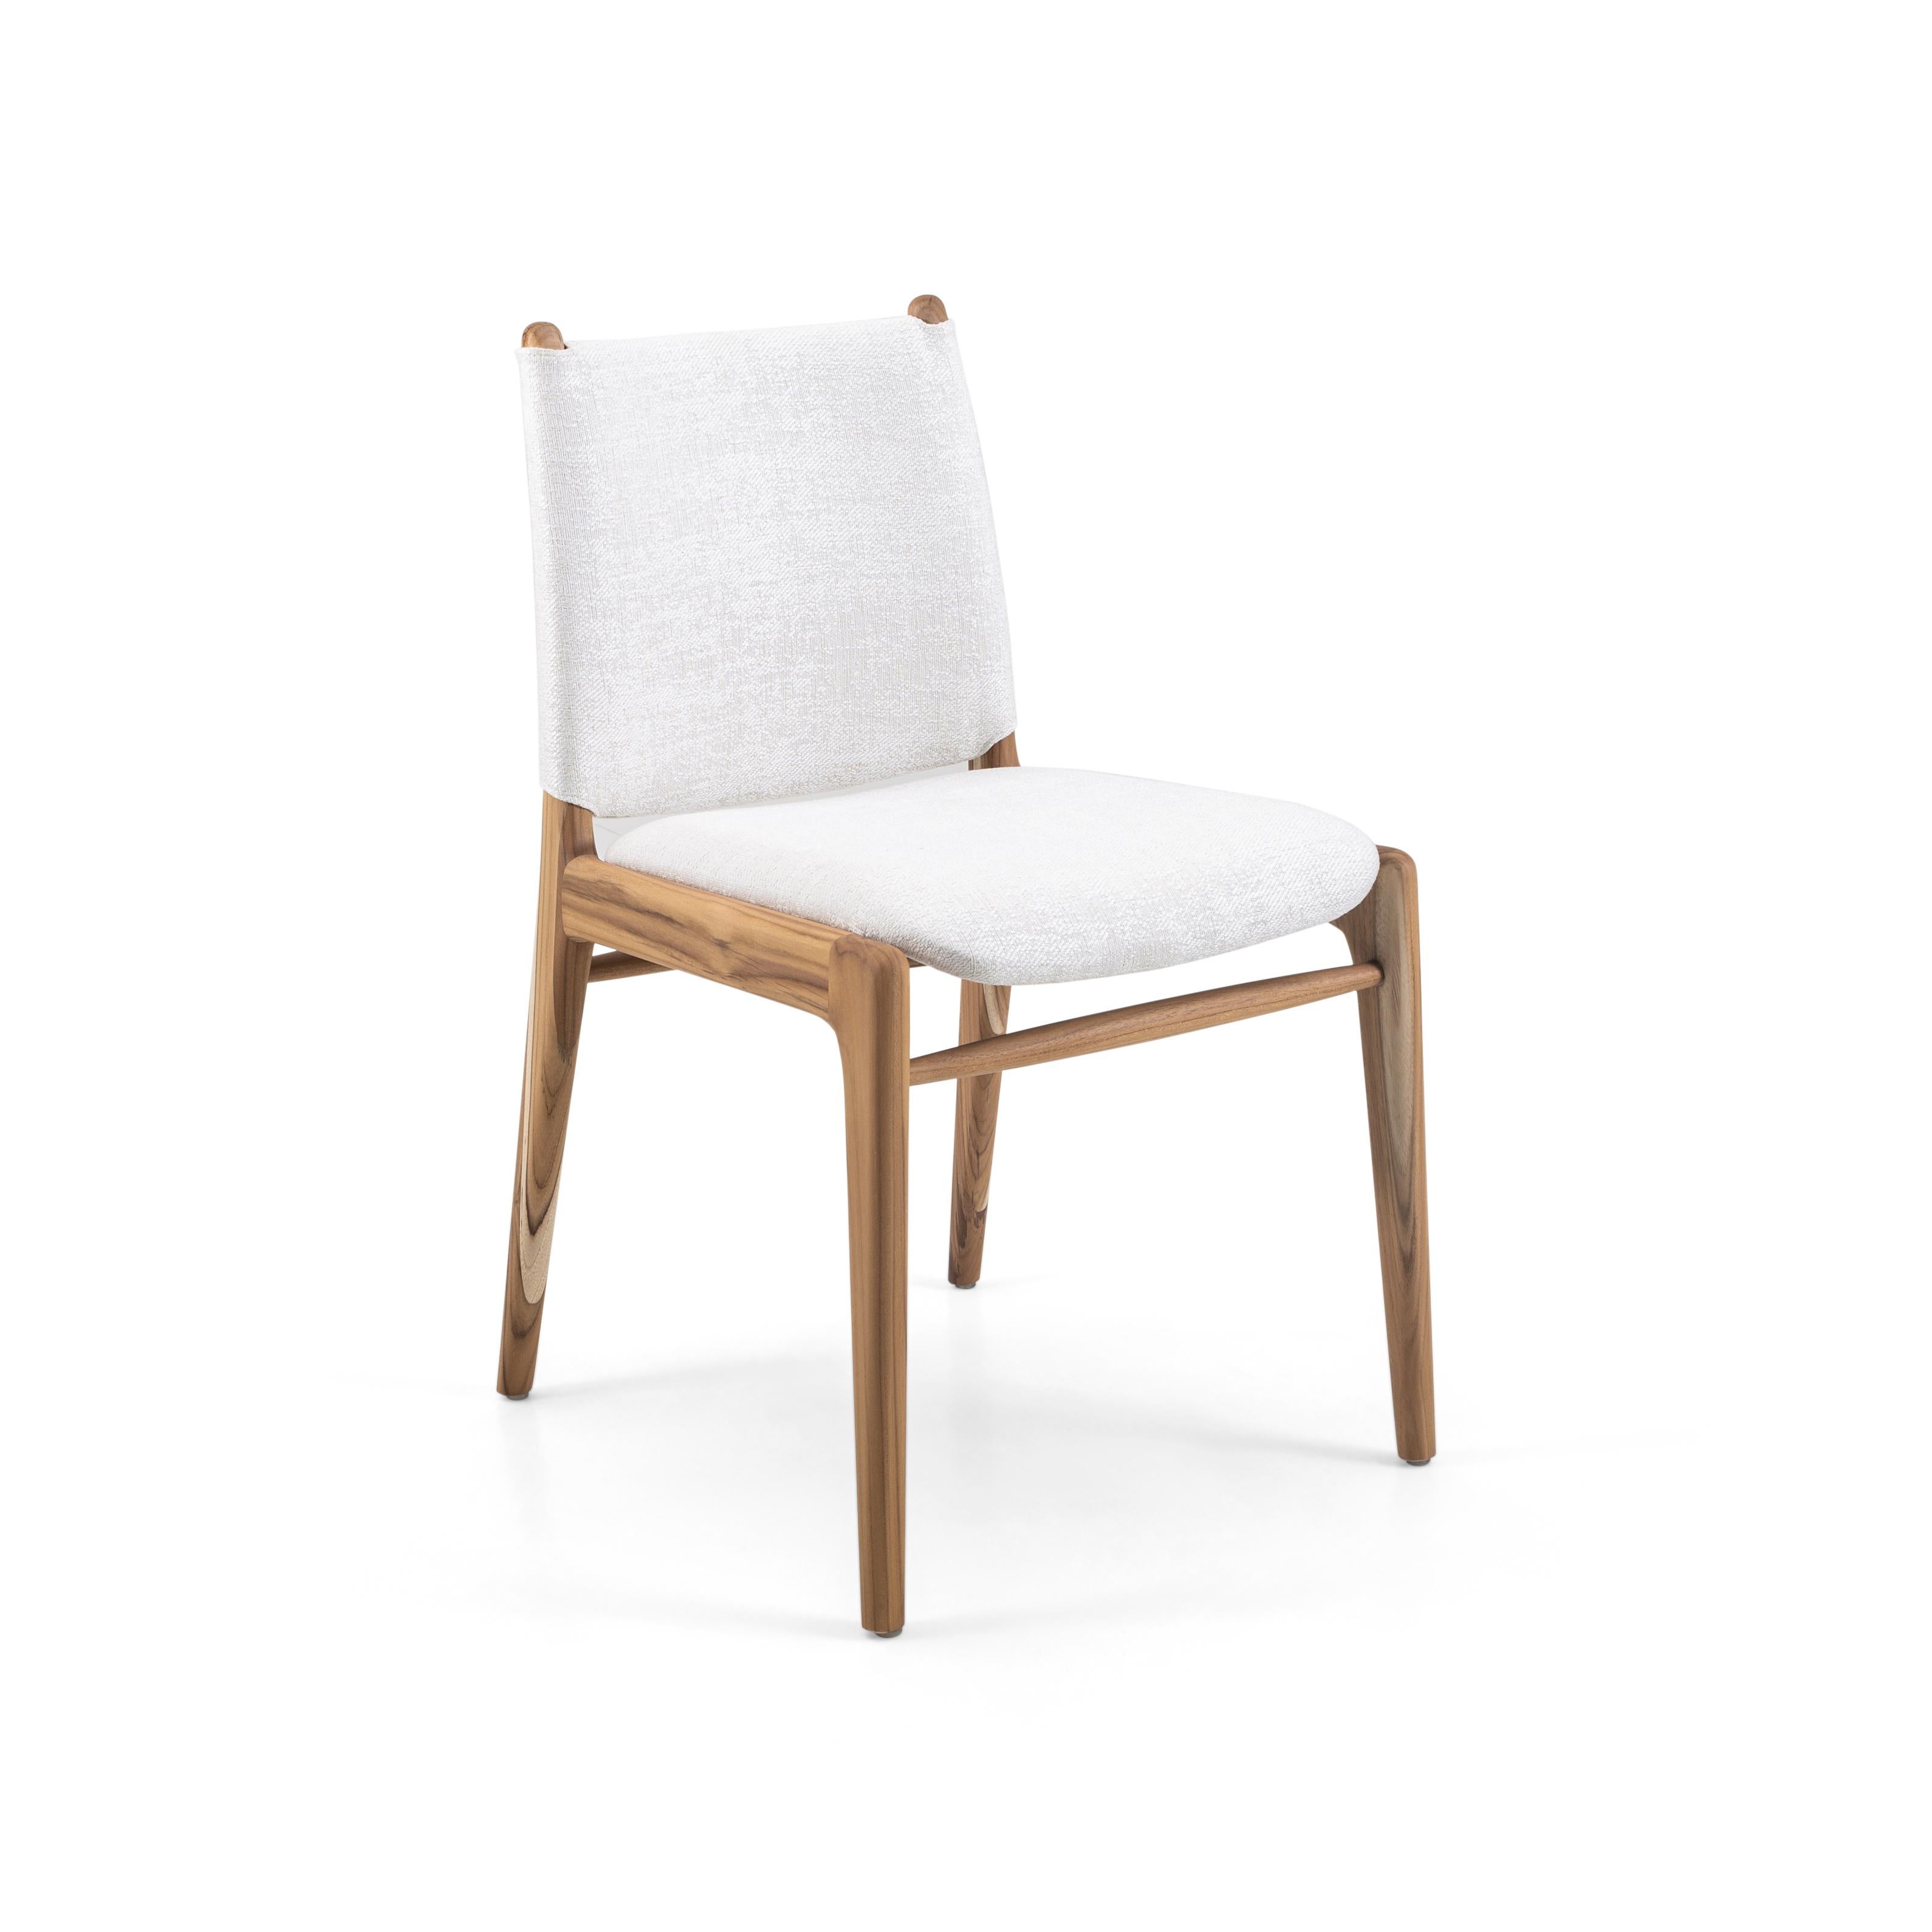 The Cappio chair highlights our beautiful teak wood finish combined with a stunning light beige fabric, this chair features a unique buckle design on the back of the seat. Our team at Uultis has designed this simple but elegant design that will